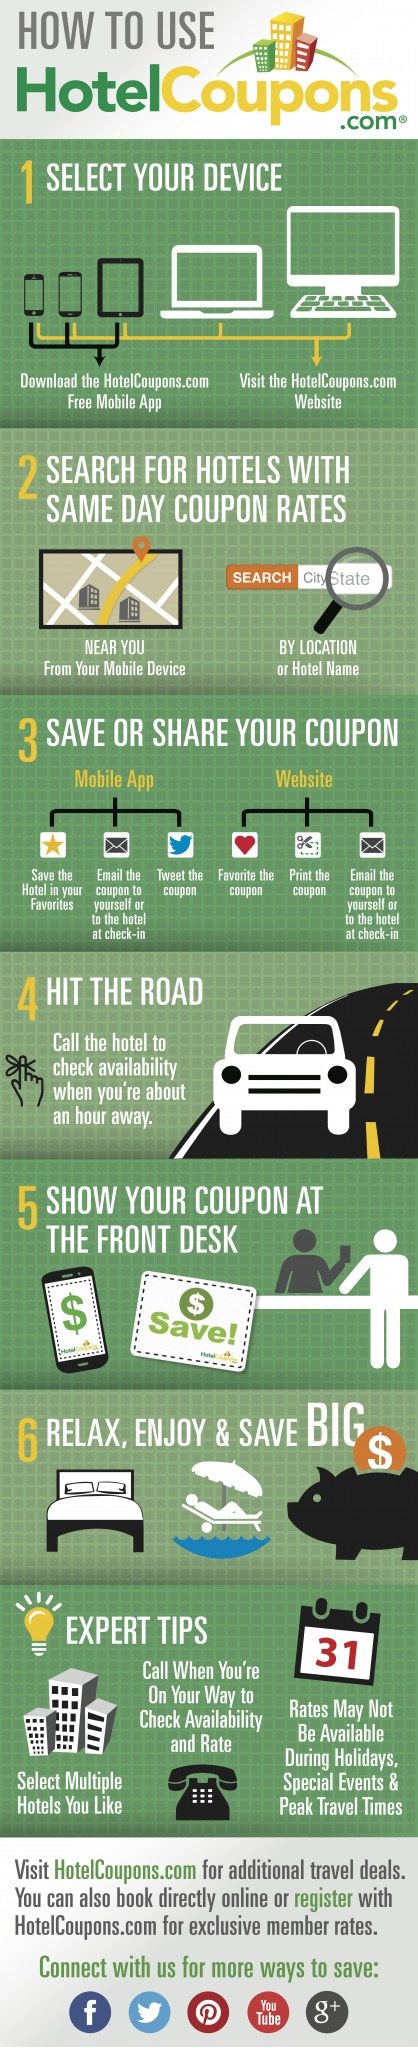 How to Use HotelCoupons.com Infographic